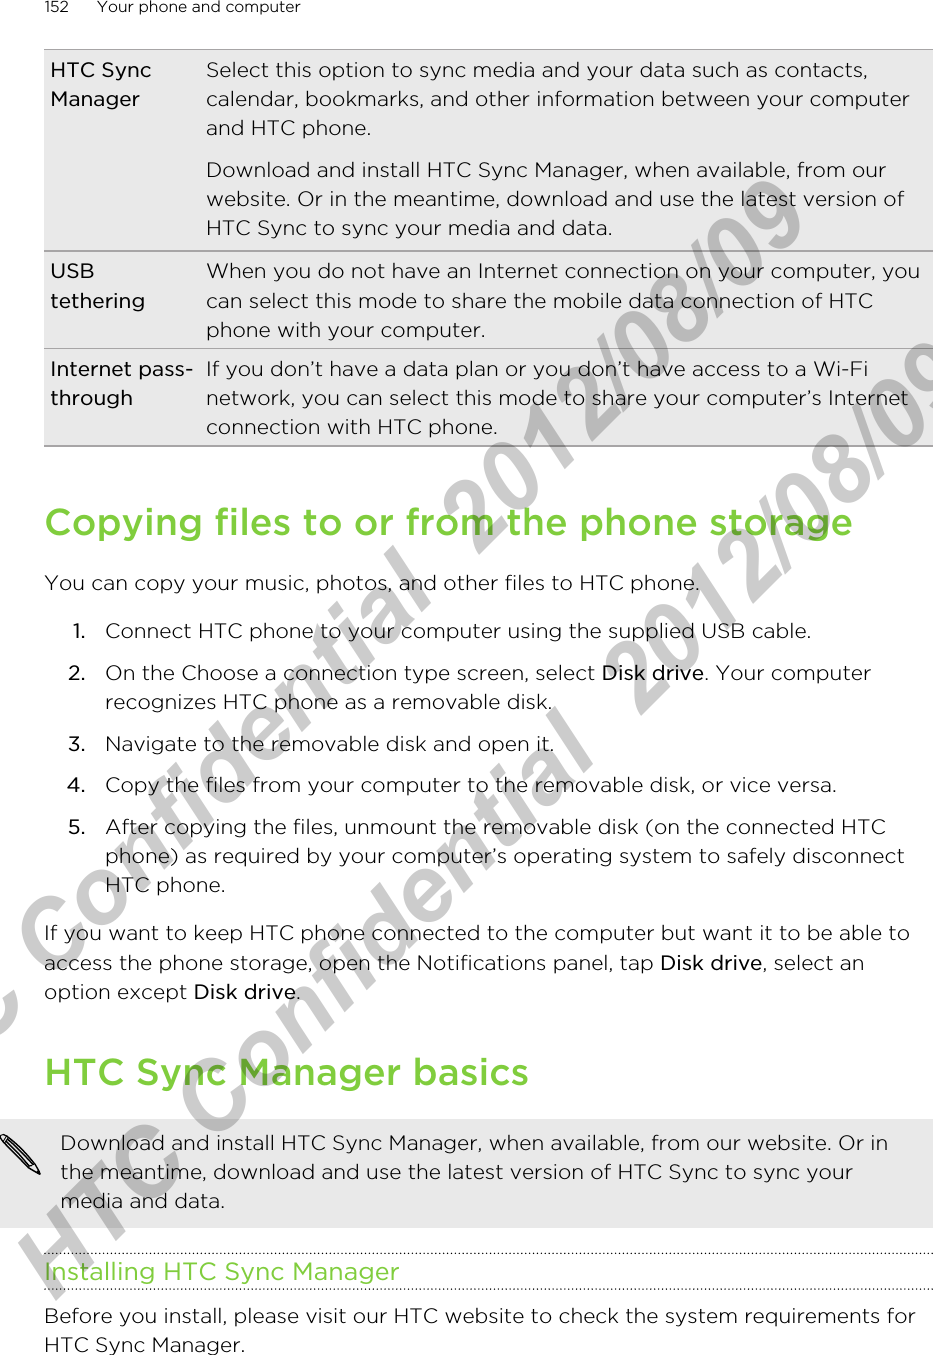 HTC SyncManagerSelect this option to sync media and your data such as contacts,calendar, bookmarks, and other information between your computerand HTC phone.Download and install HTC Sync Manager, when available, from ourwebsite. Or in the meantime, download and use the latest version ofHTC Sync to sync your media and data.USBtetheringWhen you do not have an Internet connection on your computer, youcan select this mode to share the mobile data connection of HTCphone with your computer.Internet pass-throughIf you don’t have a data plan or you don’t have access to a Wi-Finetwork, you can select this mode to share your computer’s Internetconnection with HTC phone.Copying files to or from the phone storageYou can copy your music, photos, and other files to HTC phone.1. Connect HTC phone to your computer using the supplied USB cable.2. On the Choose a connection type screen, select Disk drive. Your computerrecognizes HTC phone as a removable disk.3. Navigate to the removable disk and open it.4. Copy the files from your computer to the removable disk, or vice versa.5. After copying the files, unmount the removable disk (on the connected HTCphone) as required by your computer’s operating system to safely disconnectHTC phone.If you want to keep HTC phone connected to the computer but want it to be able toaccess the phone storage, open the Notifications panel, tap Disk drive, select anoption except Disk drive.HTC Sync Manager basicsDownload and install HTC Sync Manager, when available, from our website. Or inthe meantime, download and use the latest version of HTC Sync to sync yourmedia and data.Installing HTC Sync ManagerBefore you install, please visit our HTC website to check the system requirements forHTC Sync Manager.152 Your phone and computerHTC Confidential  2012/08/09  HTC Confidential  2012/08/09 